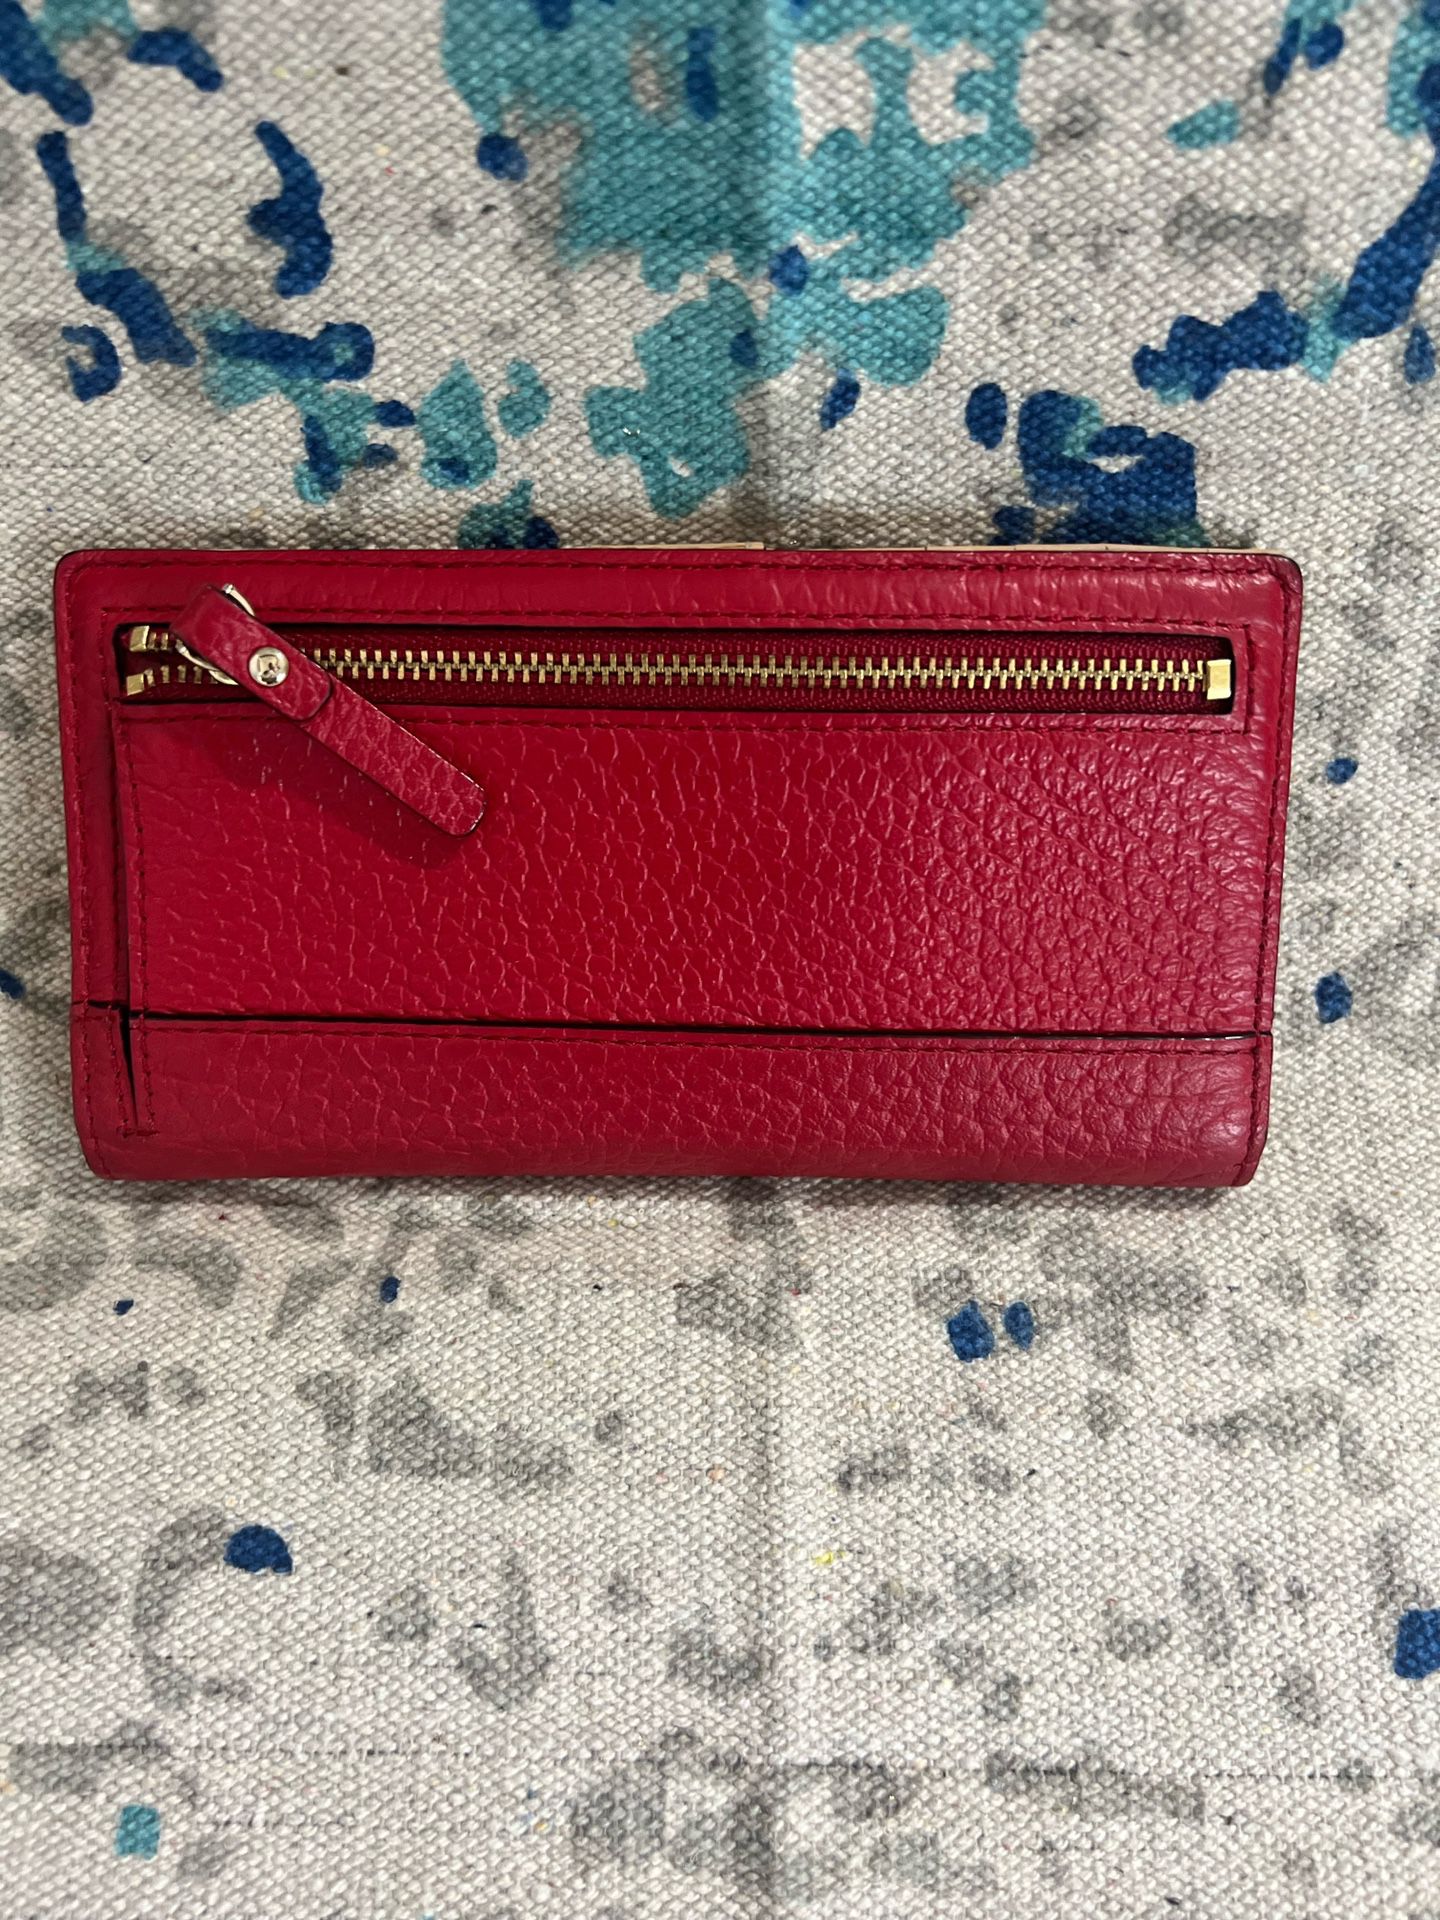 Kate Spade Wallet - Red - Preloved But In Great Condition